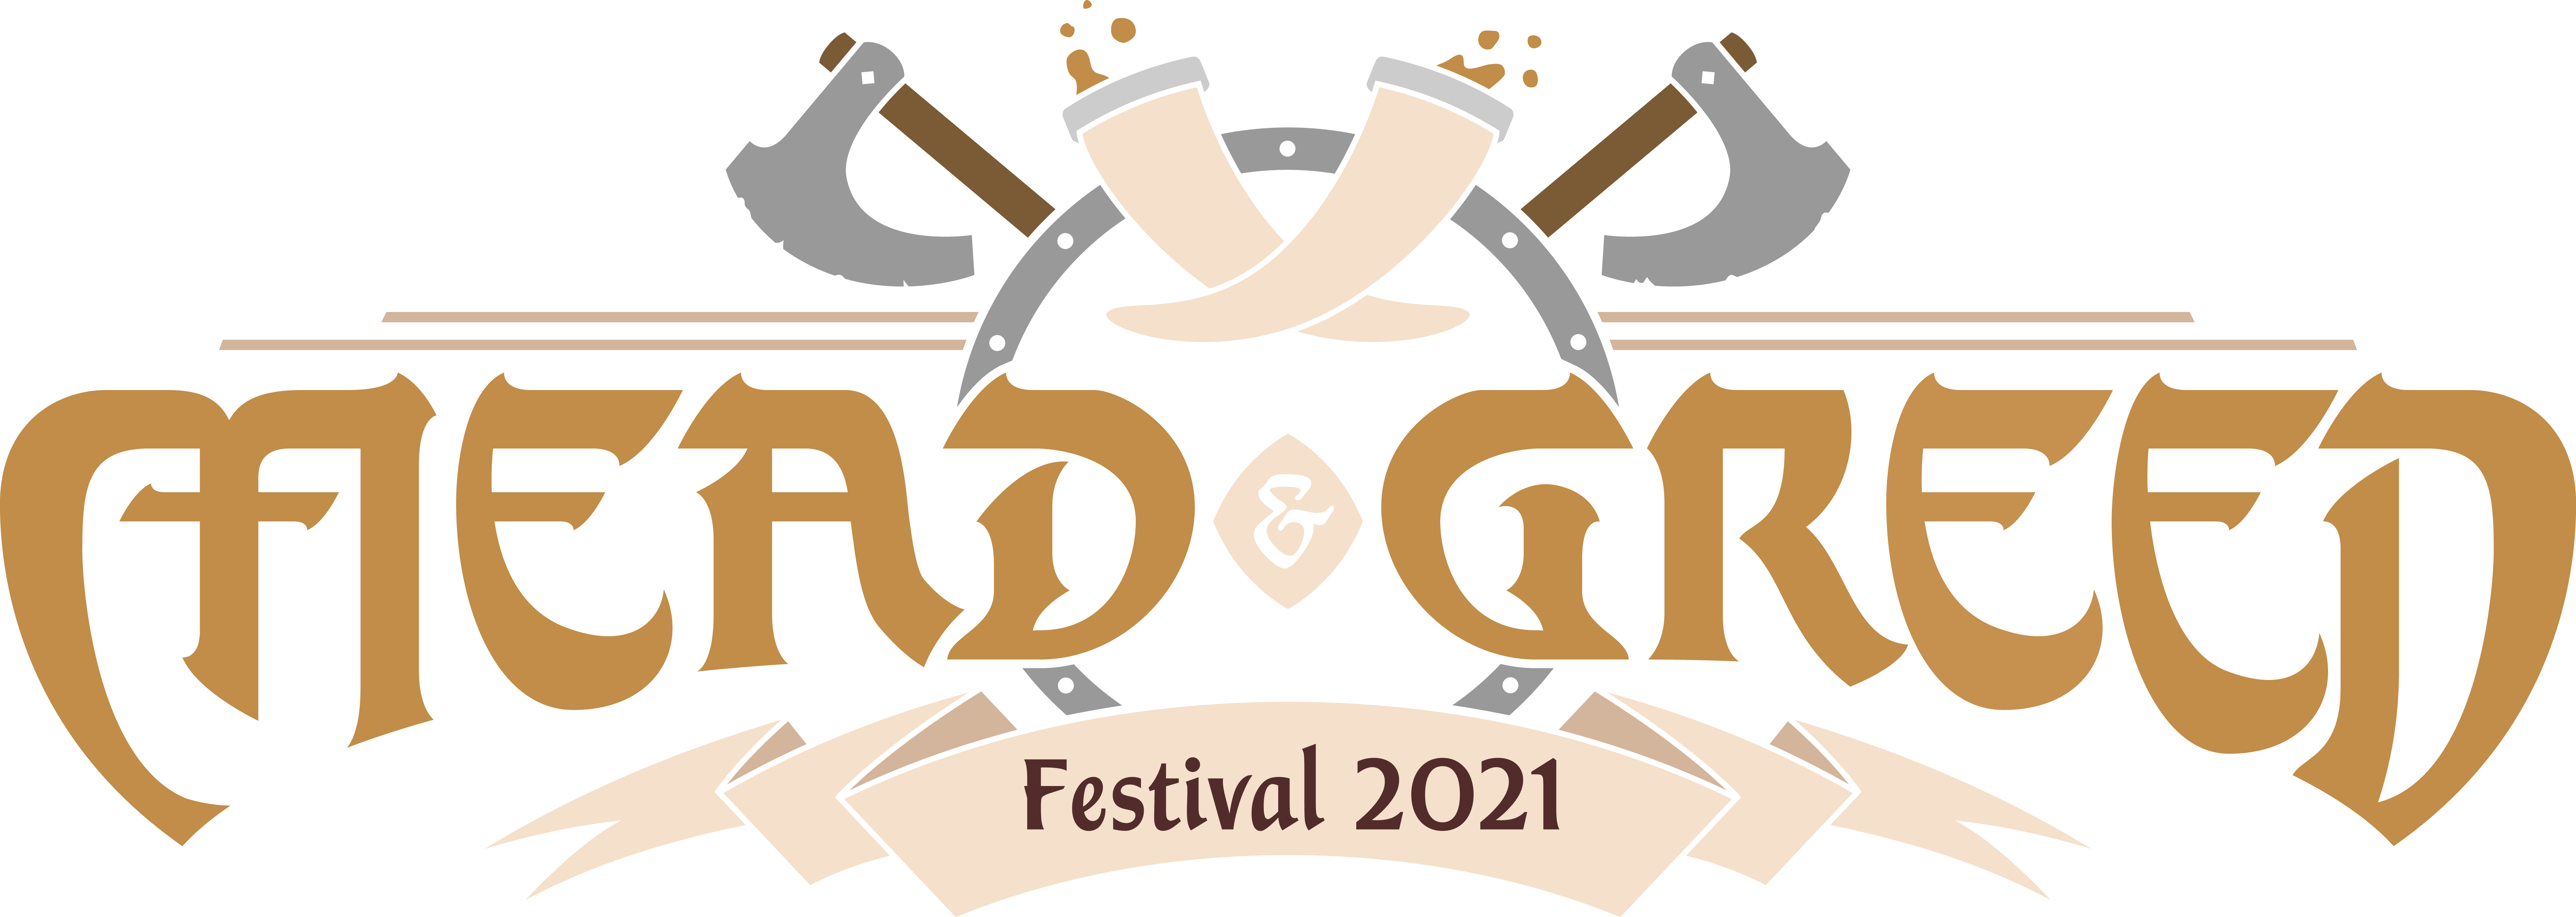 Mead & Greed Festival 2021